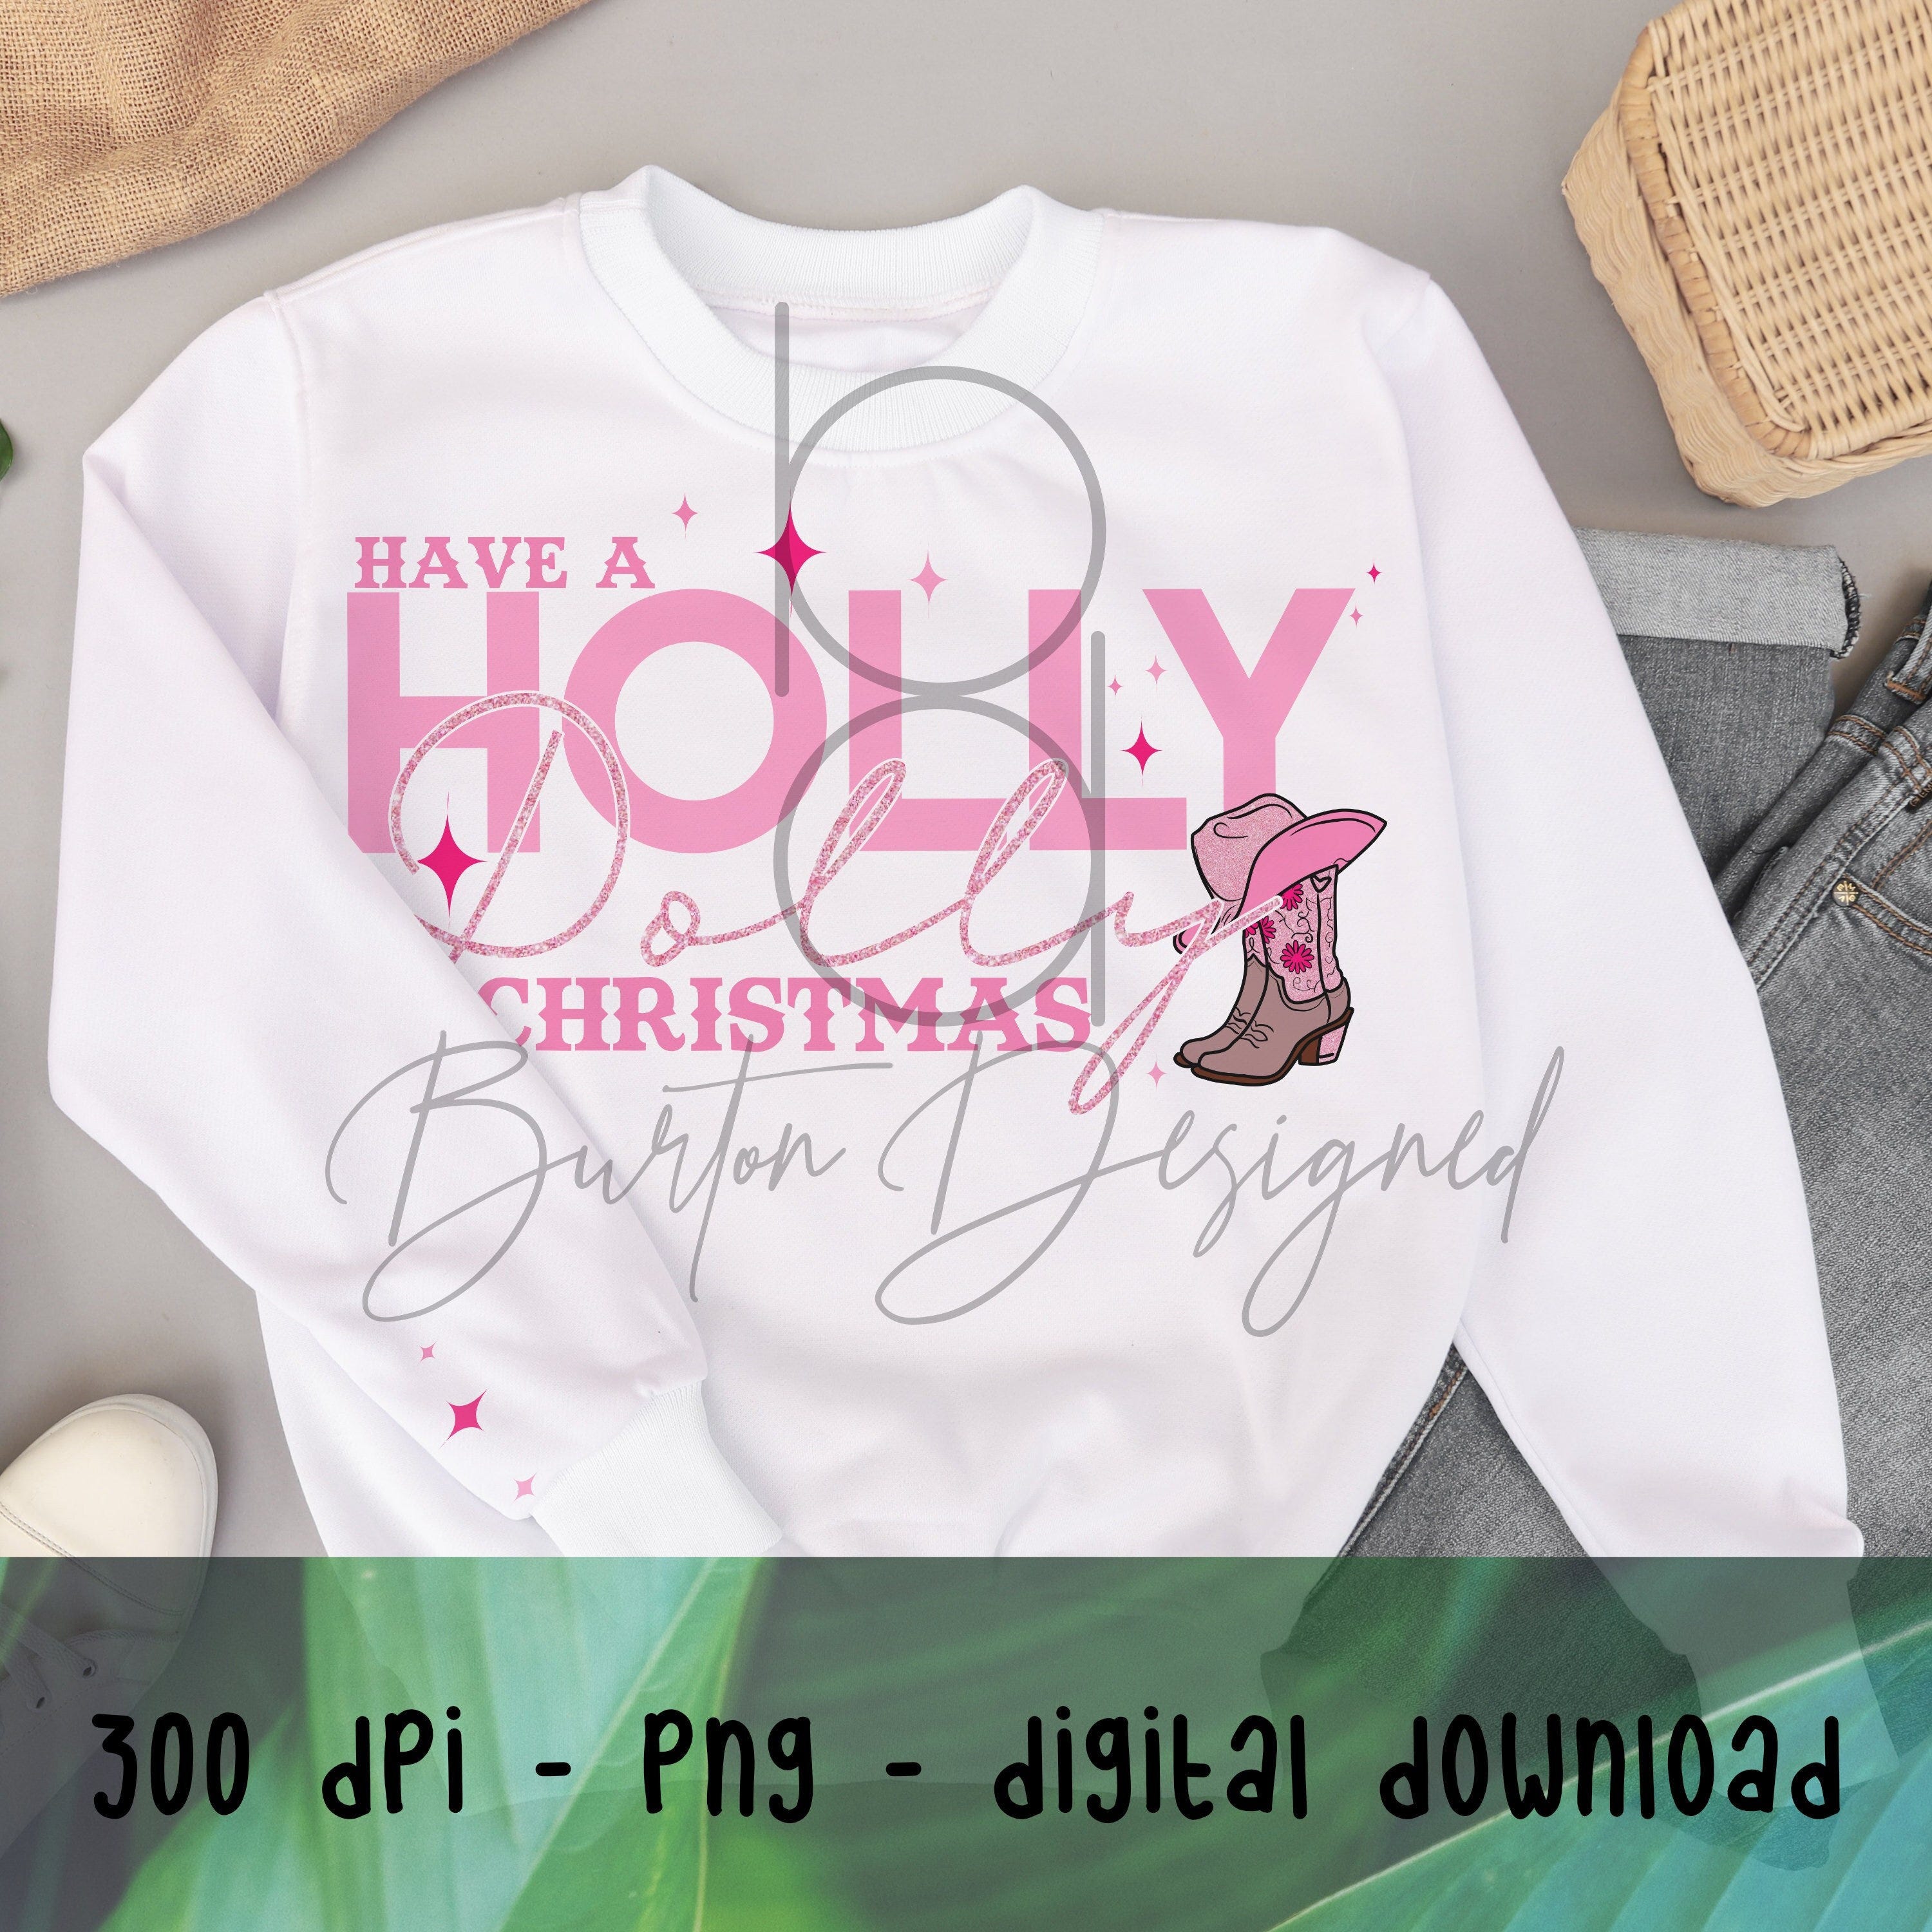 Have A Holly Dolly Christmas - Dolly Parton - Pink Christmas - Country Christmas - Sublimation PNG Digital Download